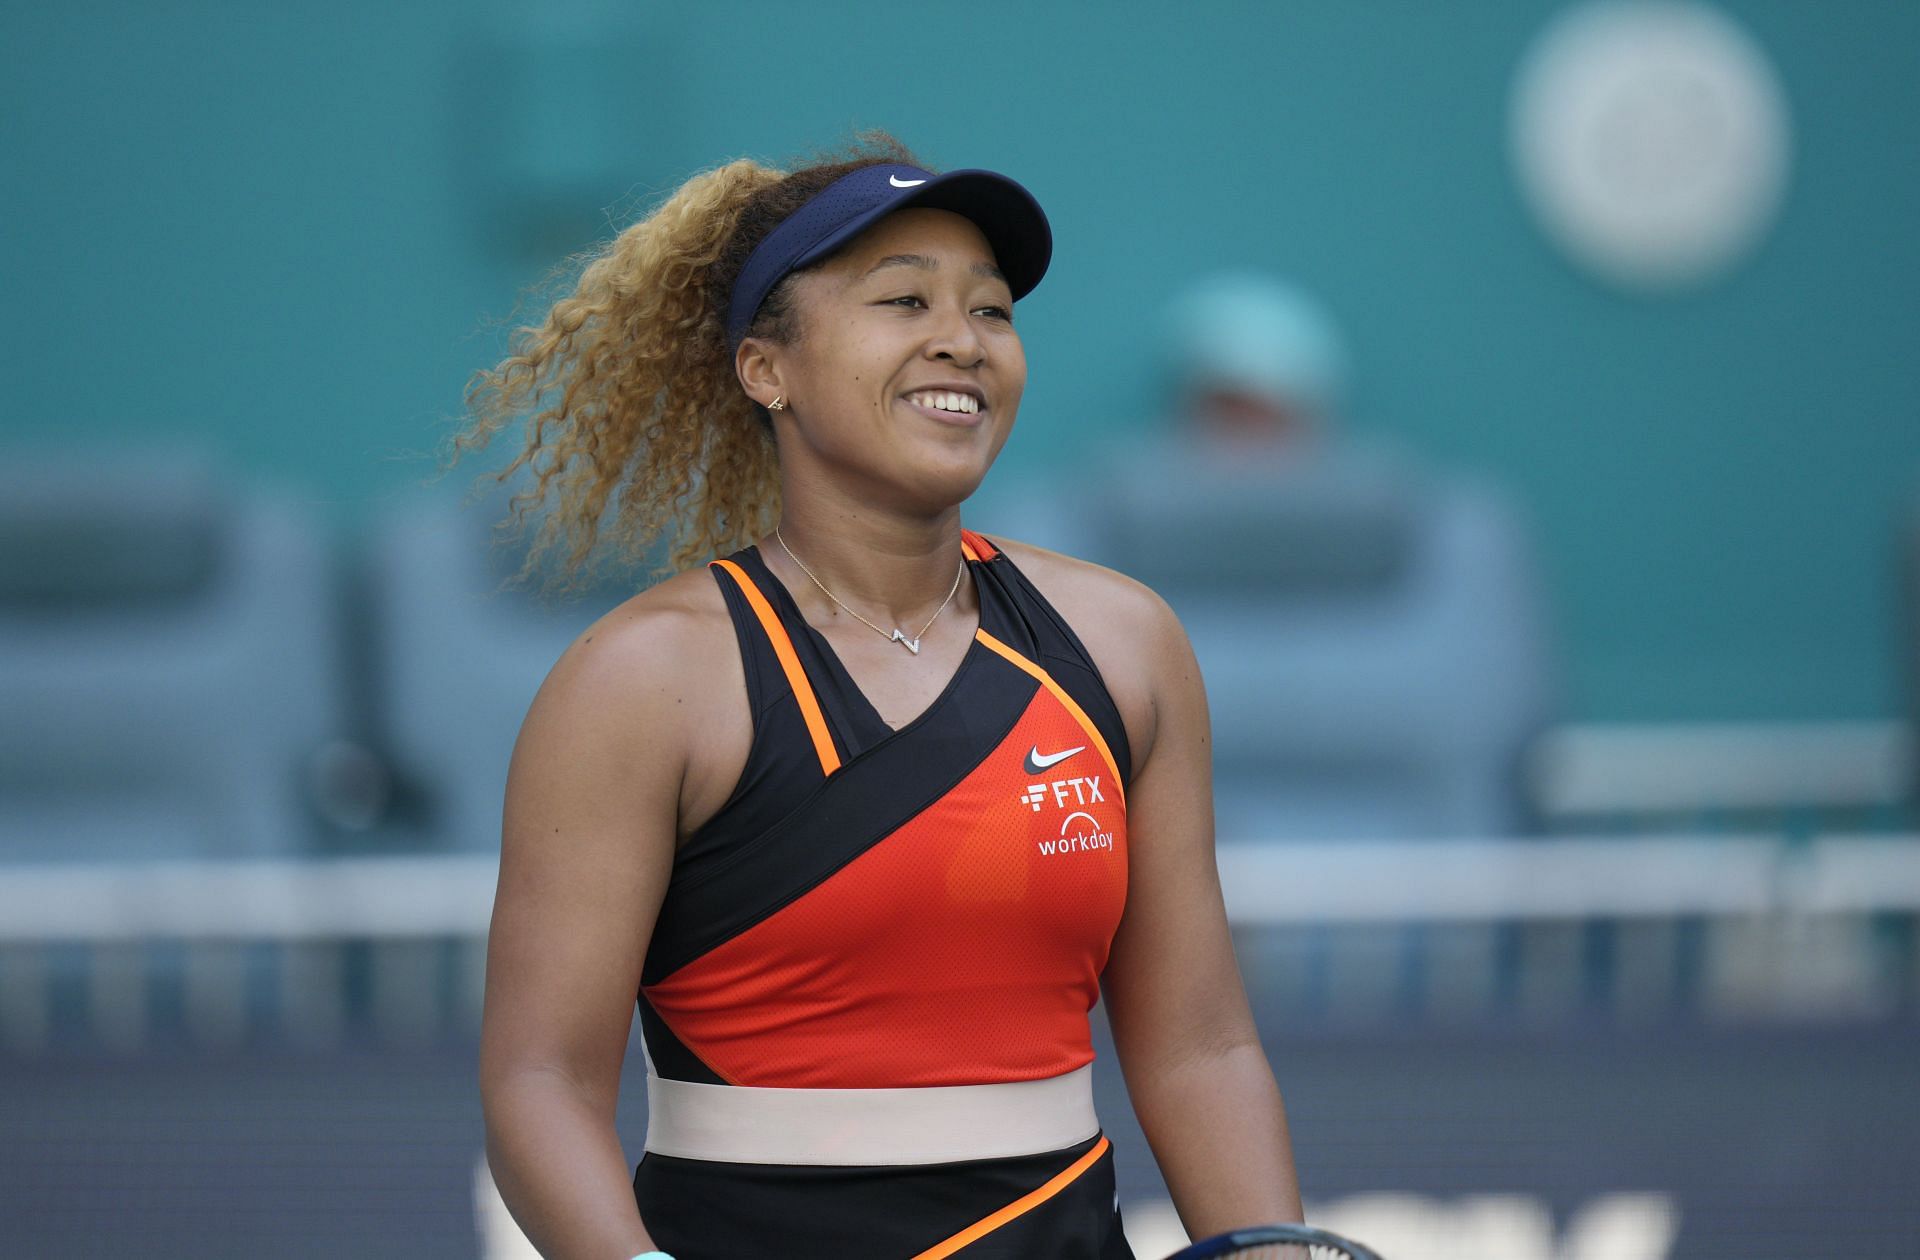 Stuart Duguid shed light on his relationship with Naomi Osaka in the interview